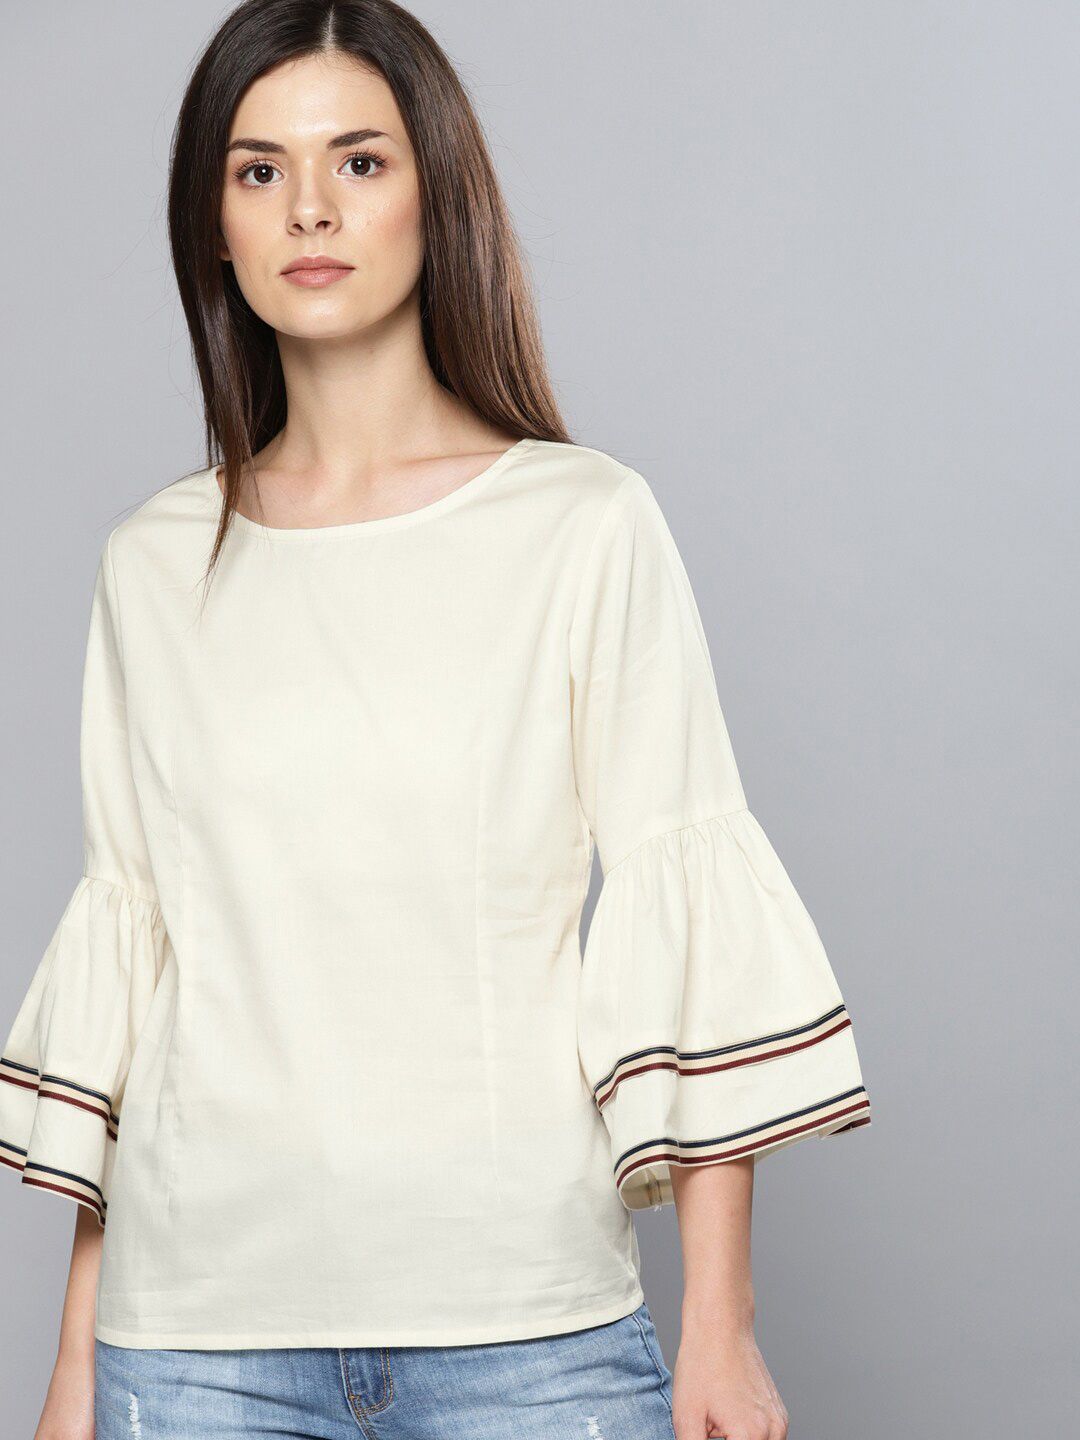 Mast & Harbour Off White Bell Sleeve Regular Top Price in India